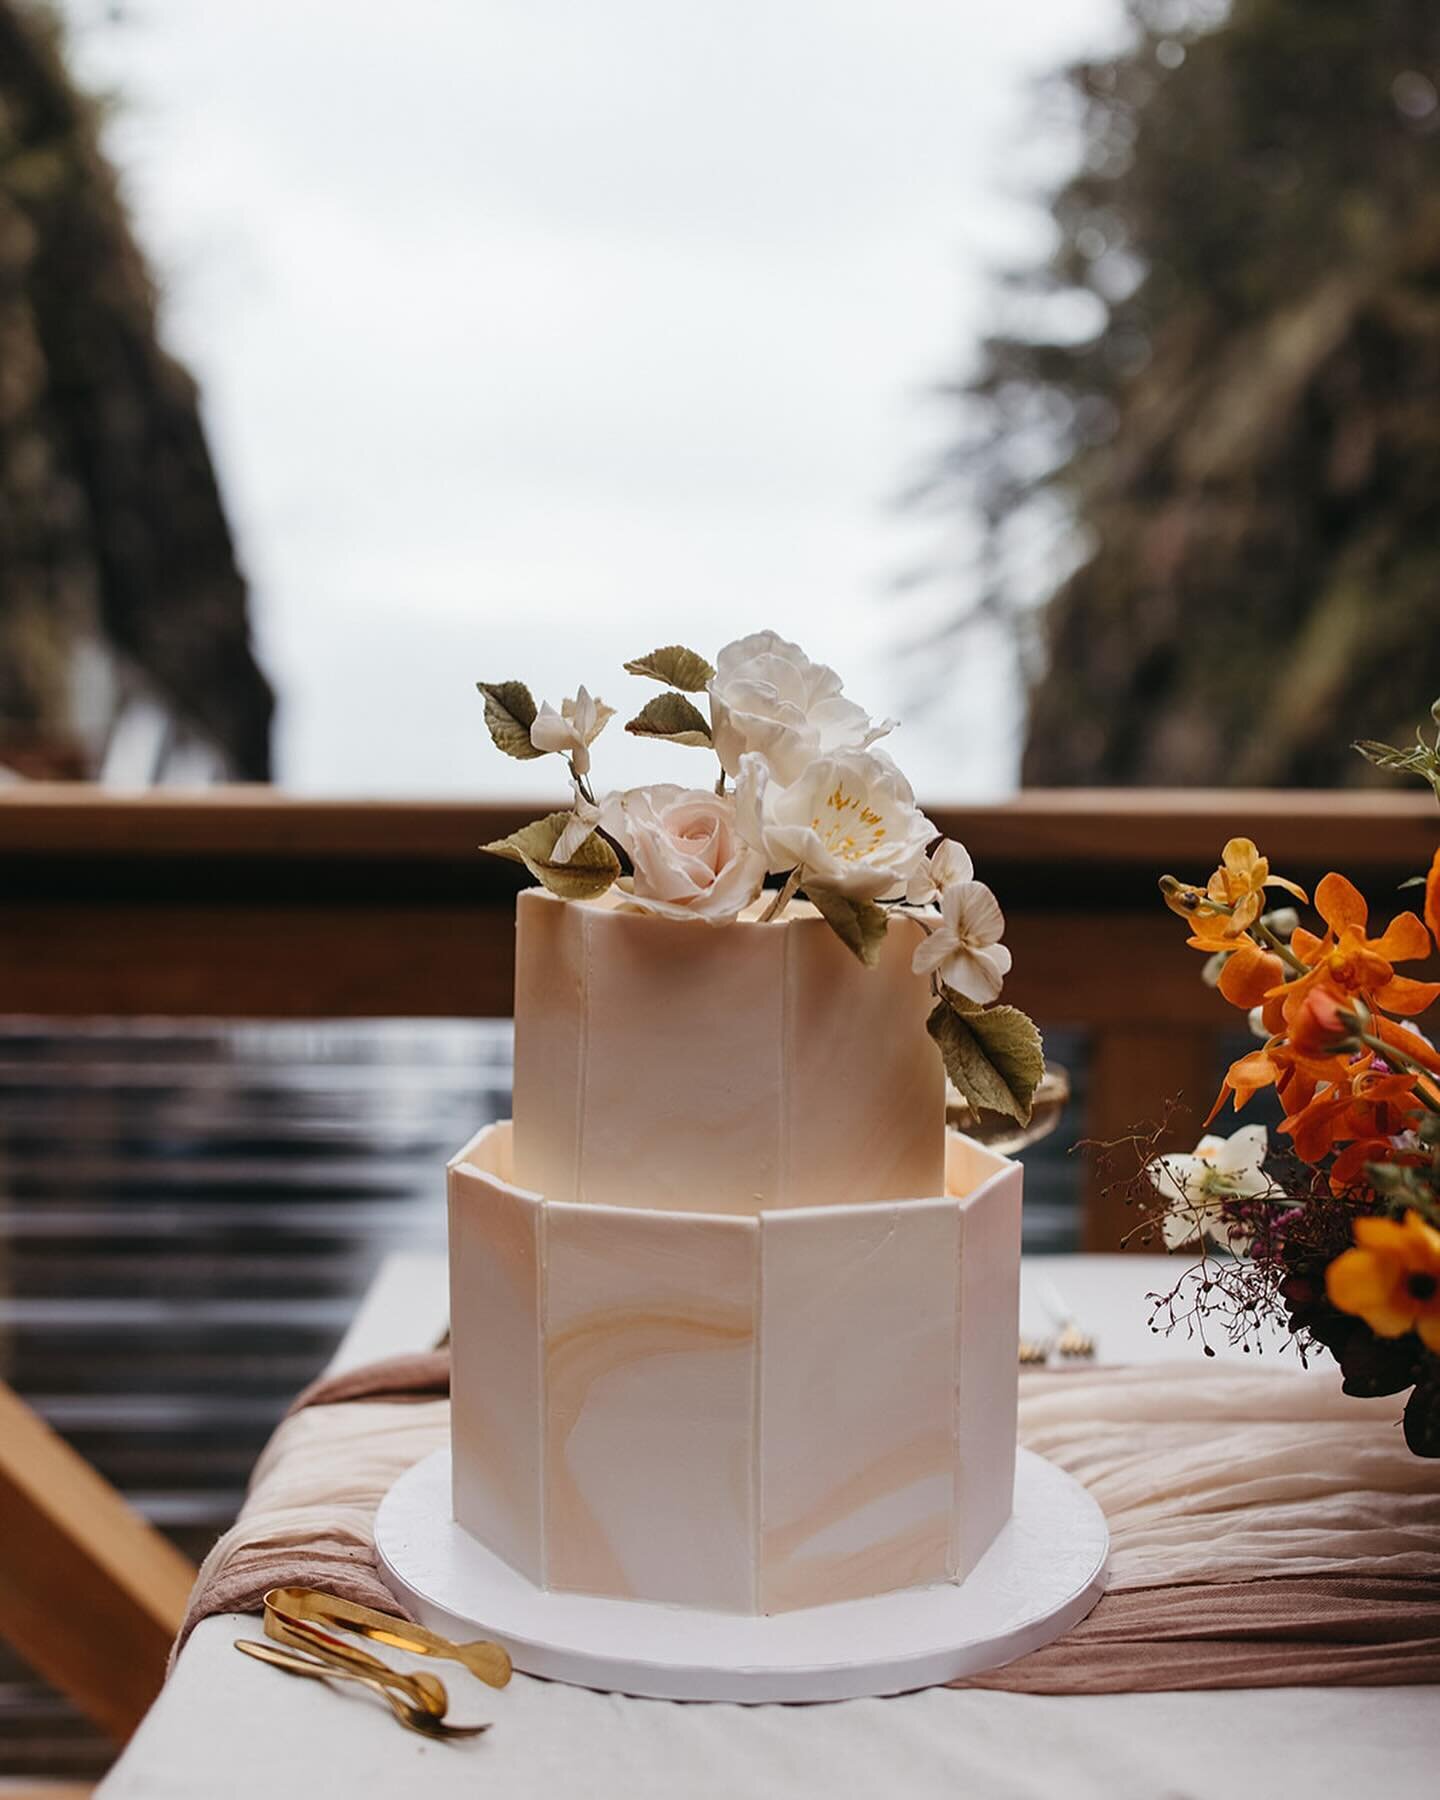 Tips on picking the perfect wedding cake 

✨ Have Fun Decision-Making ✨ 

No matter which bakery, you usually get to choose the filling, cake flavor, buttercream, and design, which is always really fun!

If you&rsquo;re open minded, ask for the best 